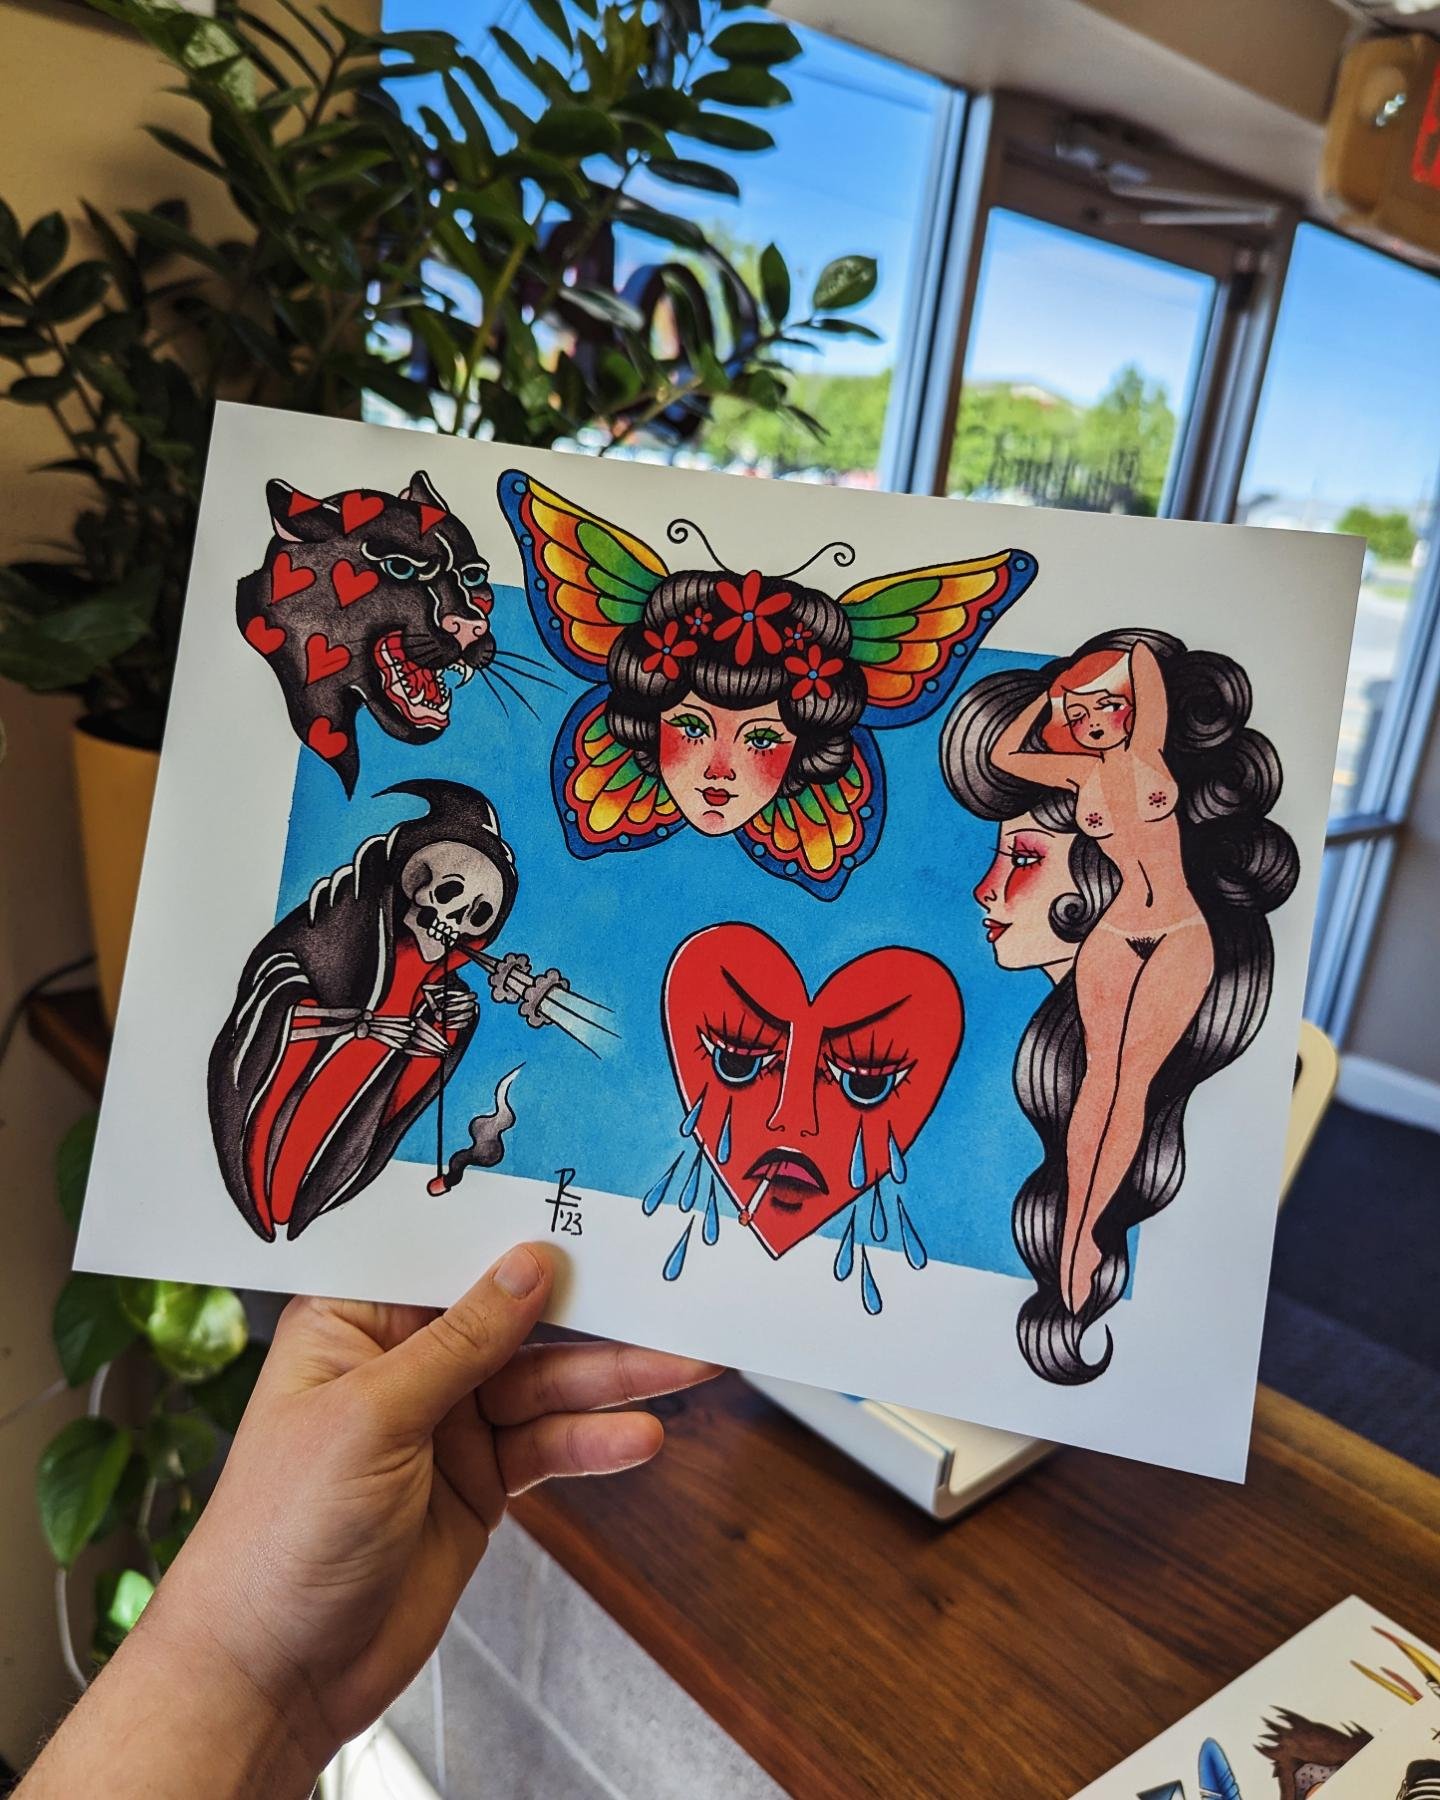 PRINTS ARE HERE! 🌈
$20 SHIPPING, $15 LOCAL PICKUP 🌈 
These are some 8.5x11 high-quality, locally made prints of my hand-painted flash! Great for walls, or other surfaces you may hang things on (I don't judge)
Holler and grab yerself one! 🌈
.
.
.
.